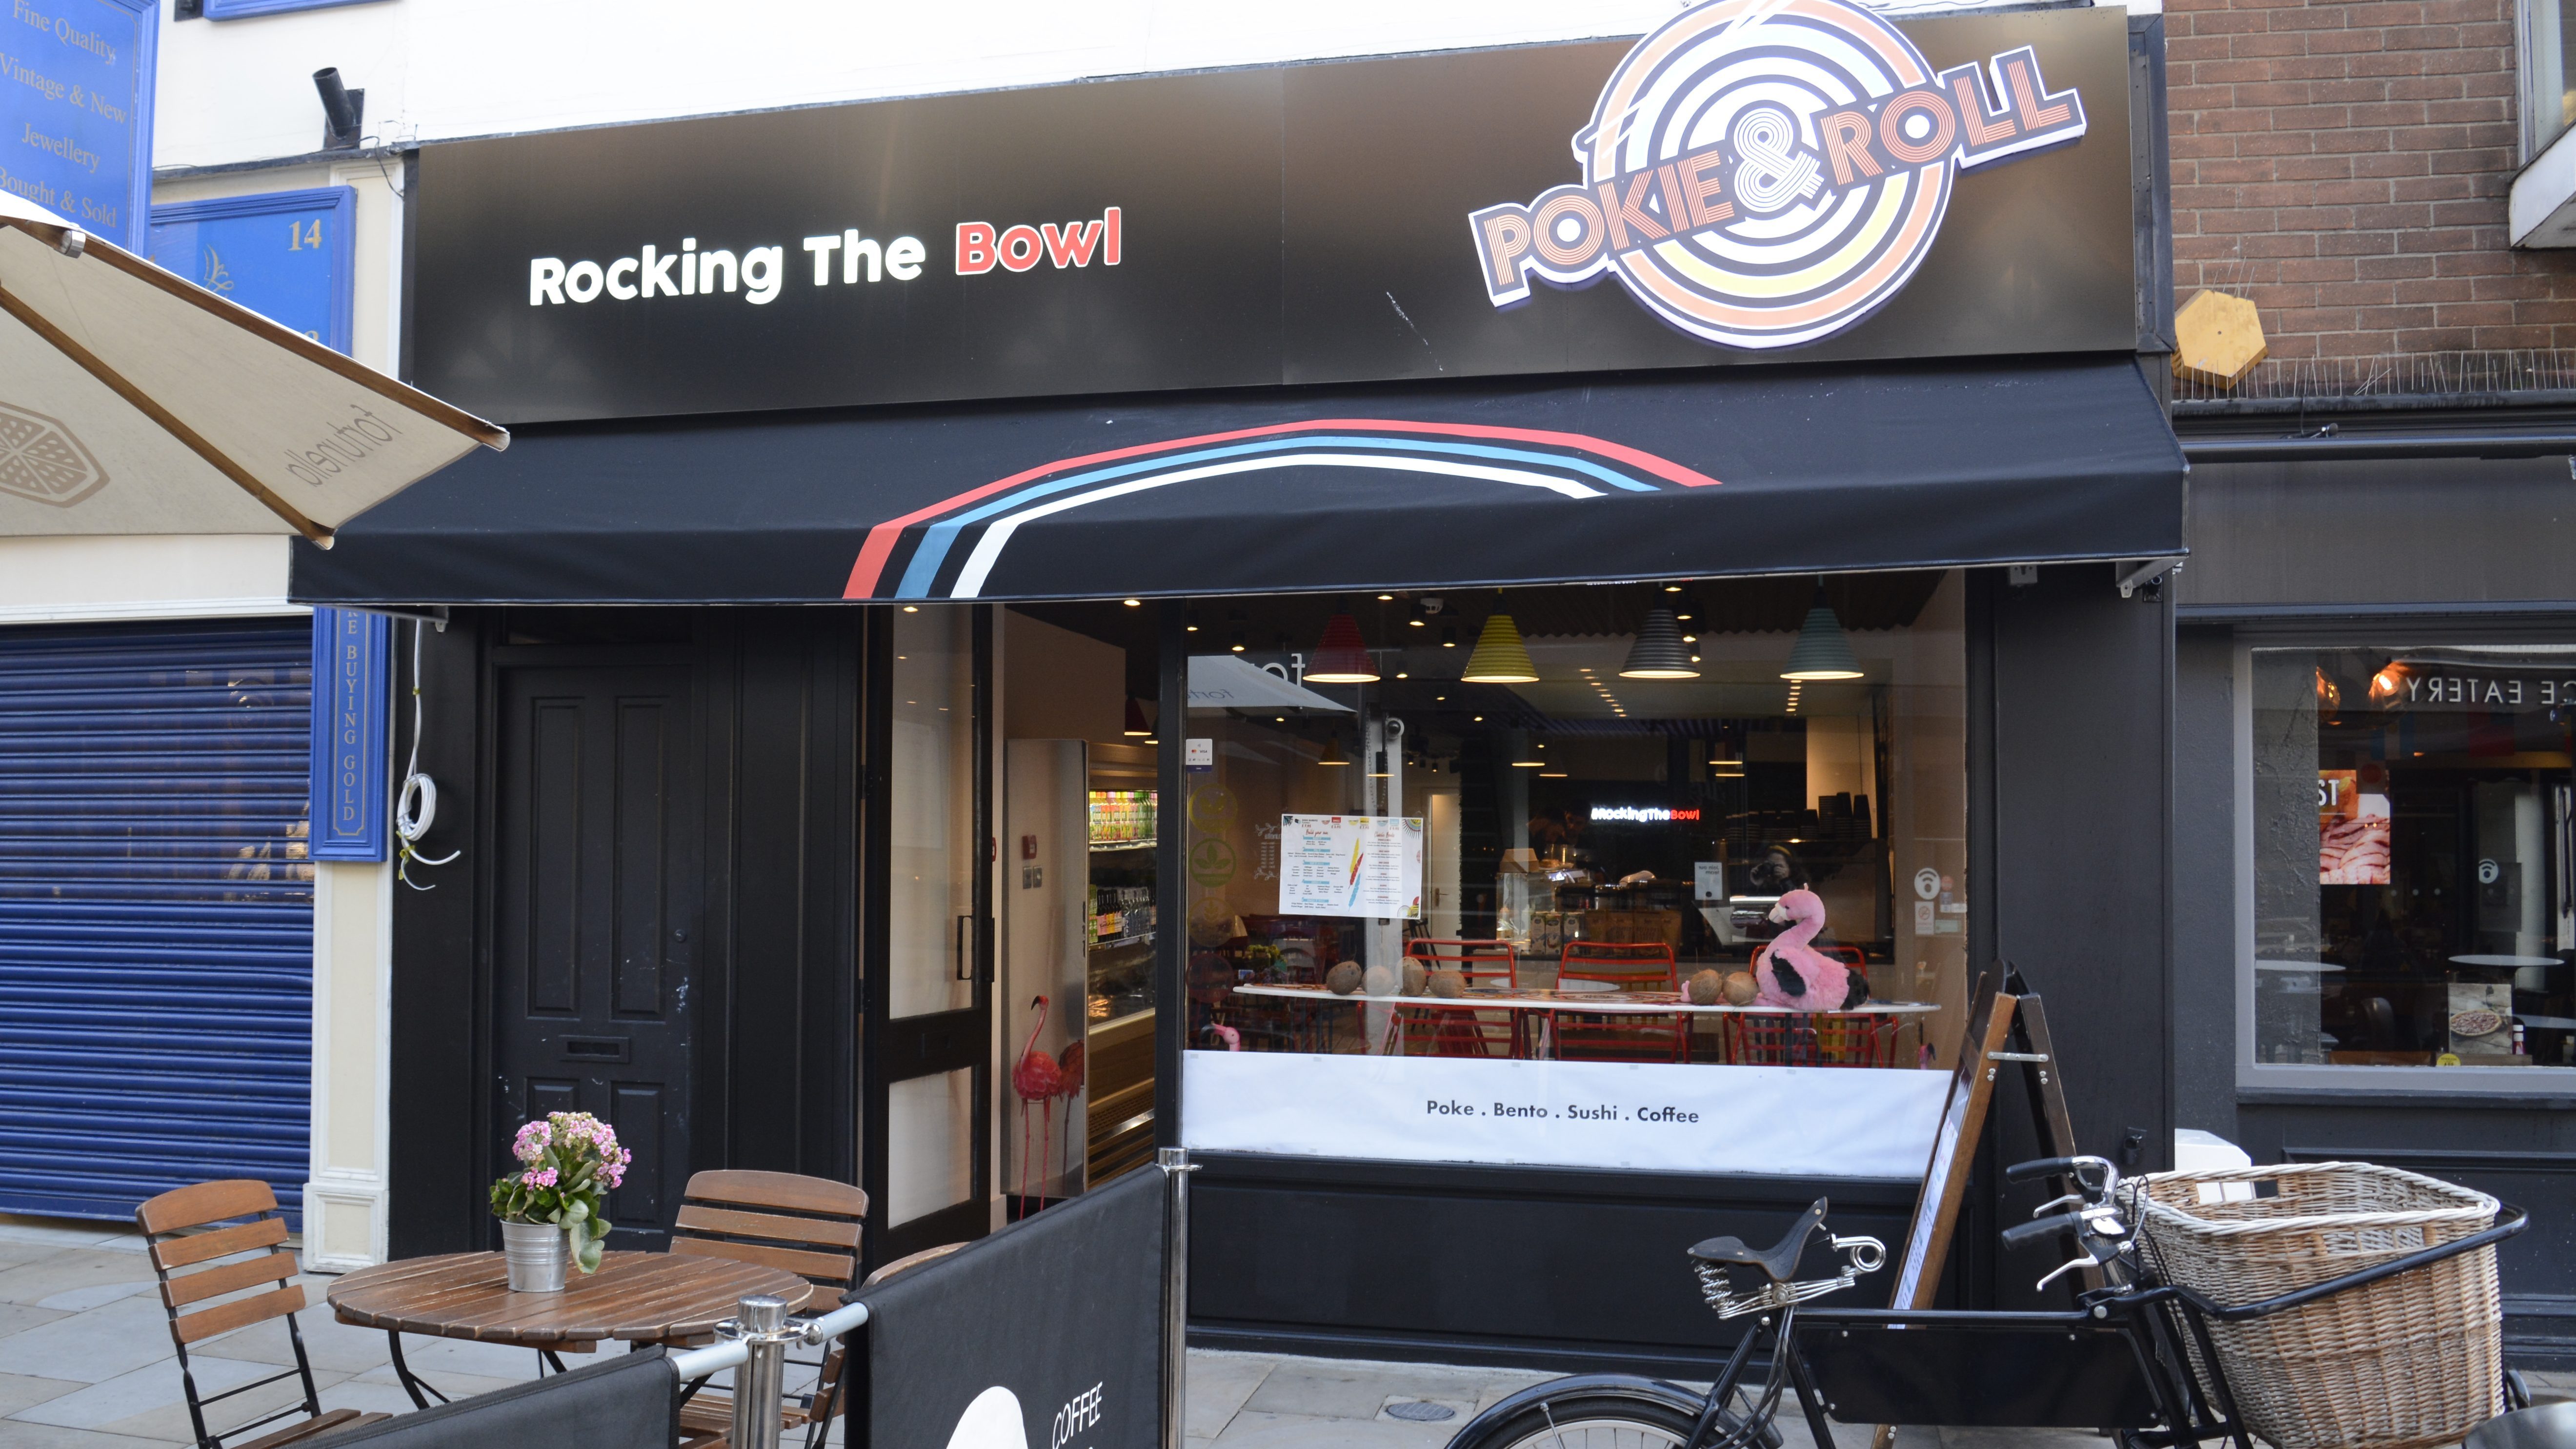 New Pokie and Roll restaurant promotes healthy eating on-the-go